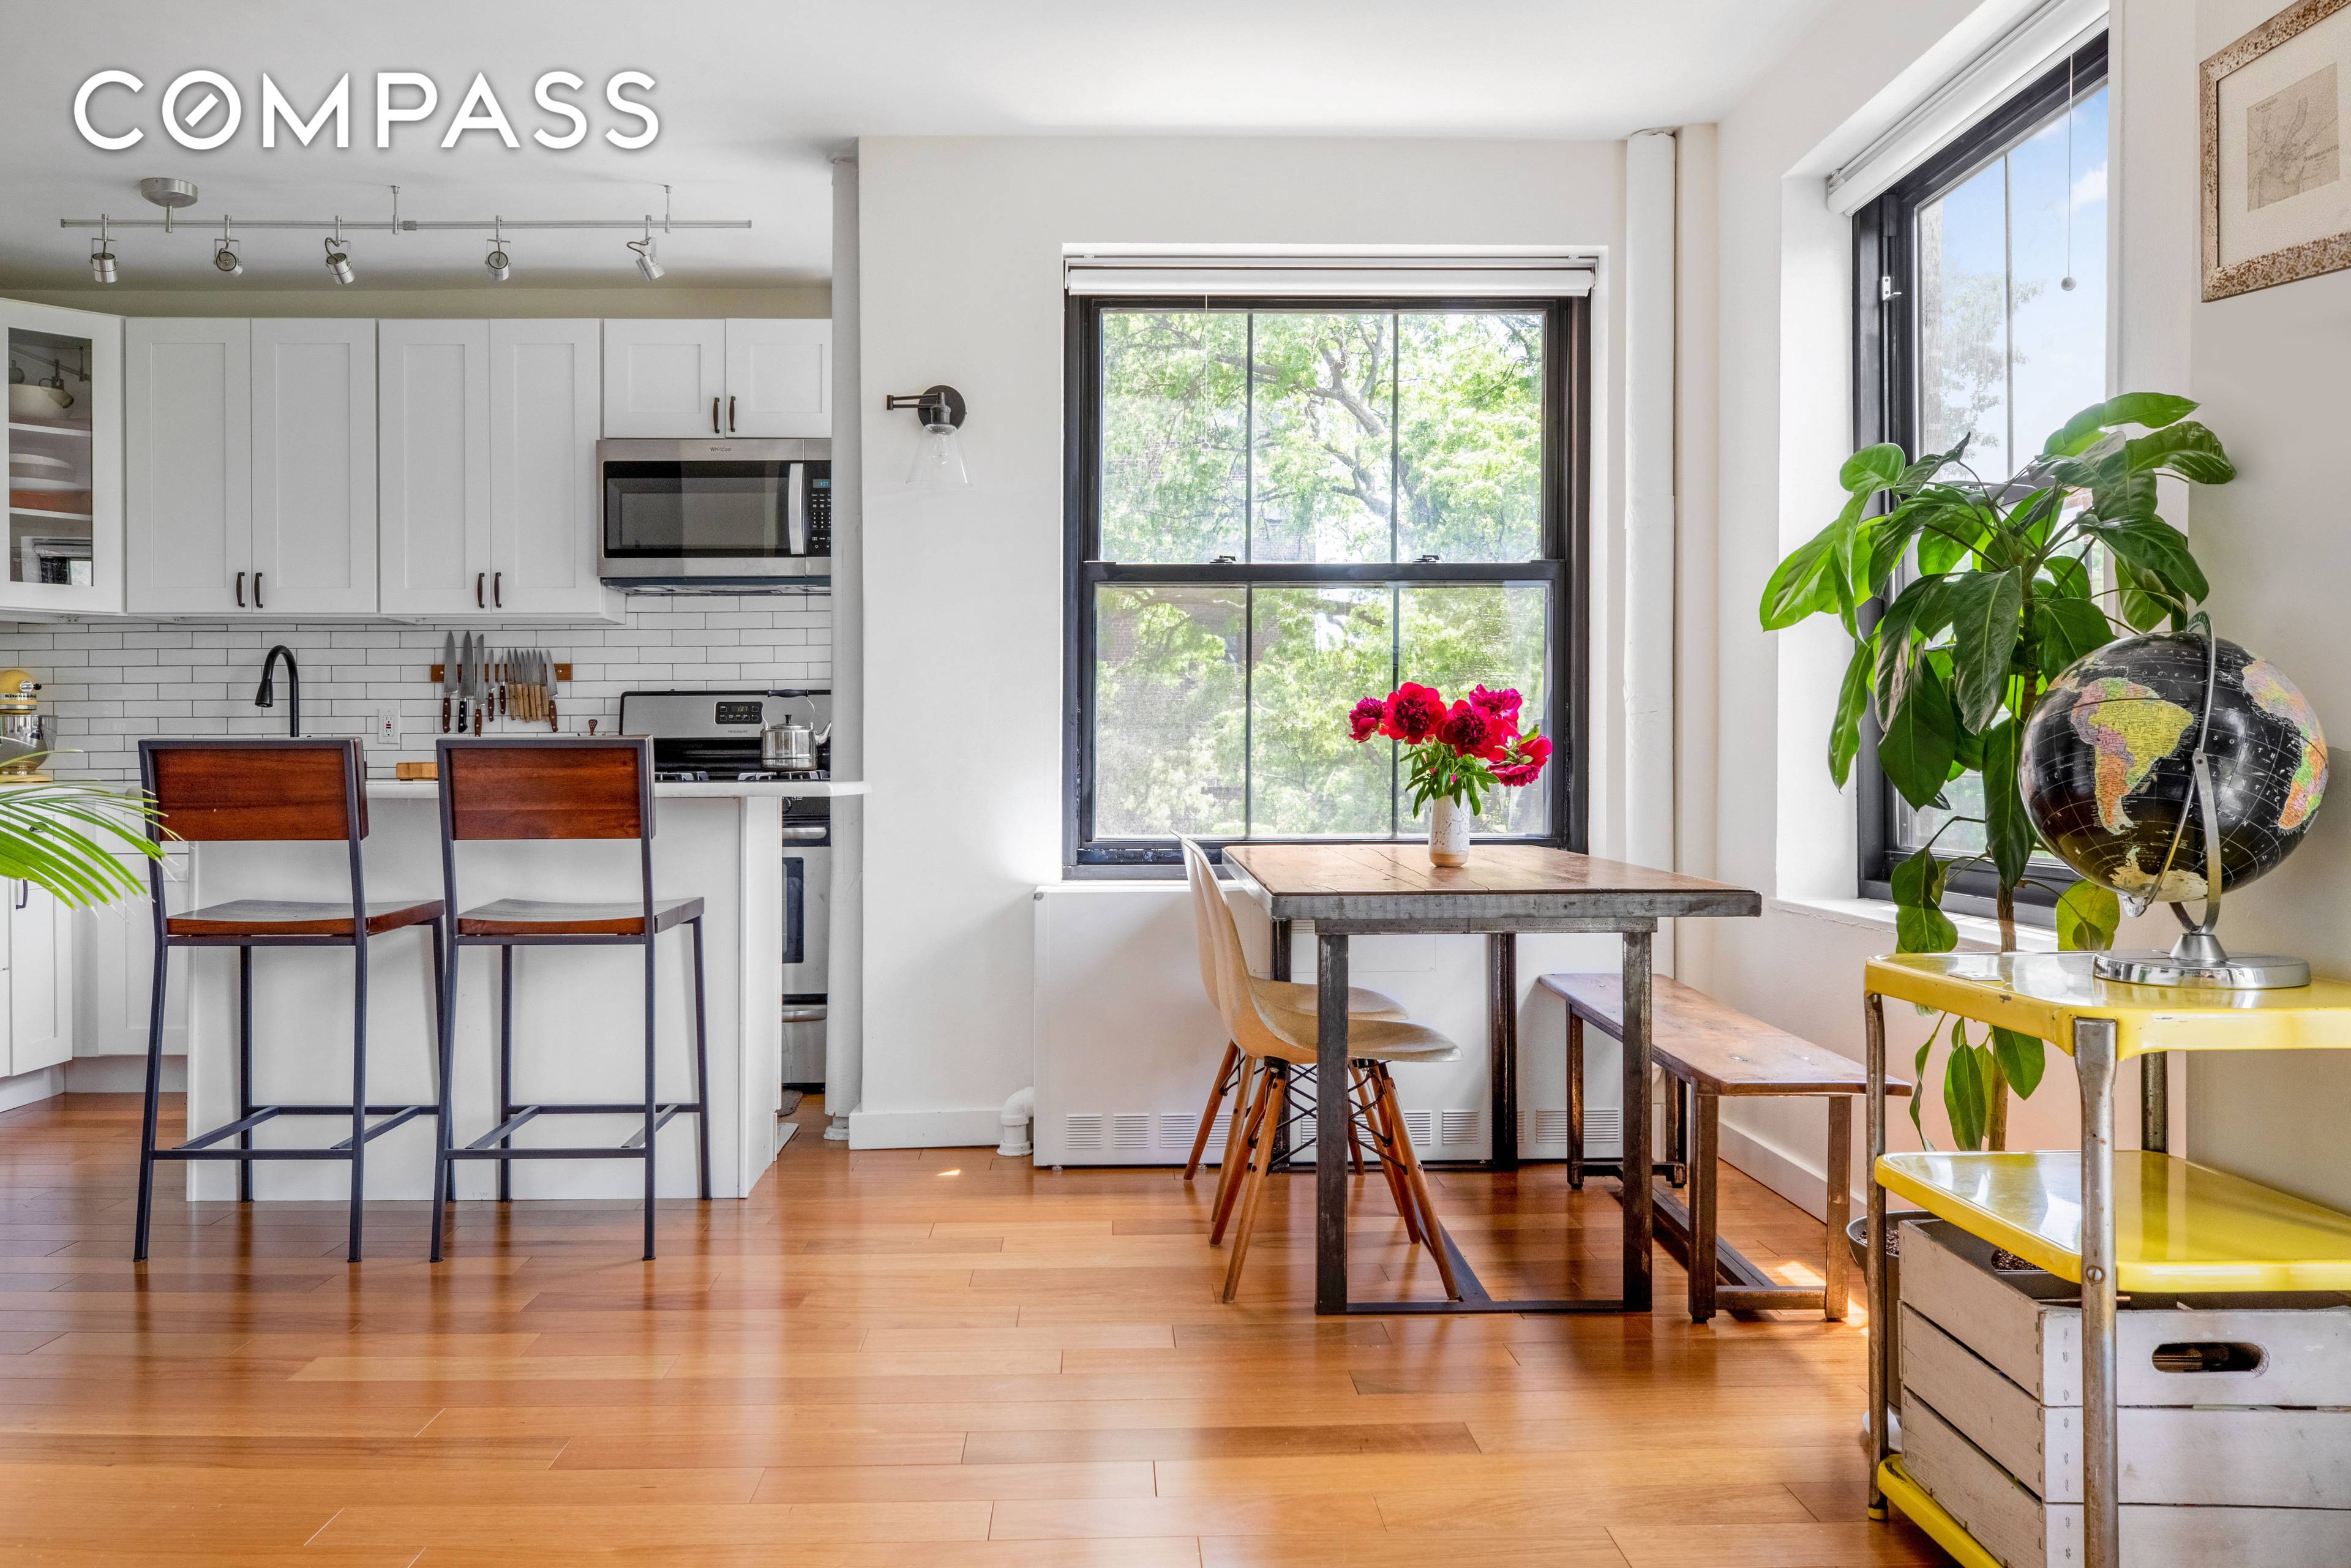 Beautifully renovated 2 bedroom 1 bathroom home in the heart of Clinton Hill, Brooklyn.